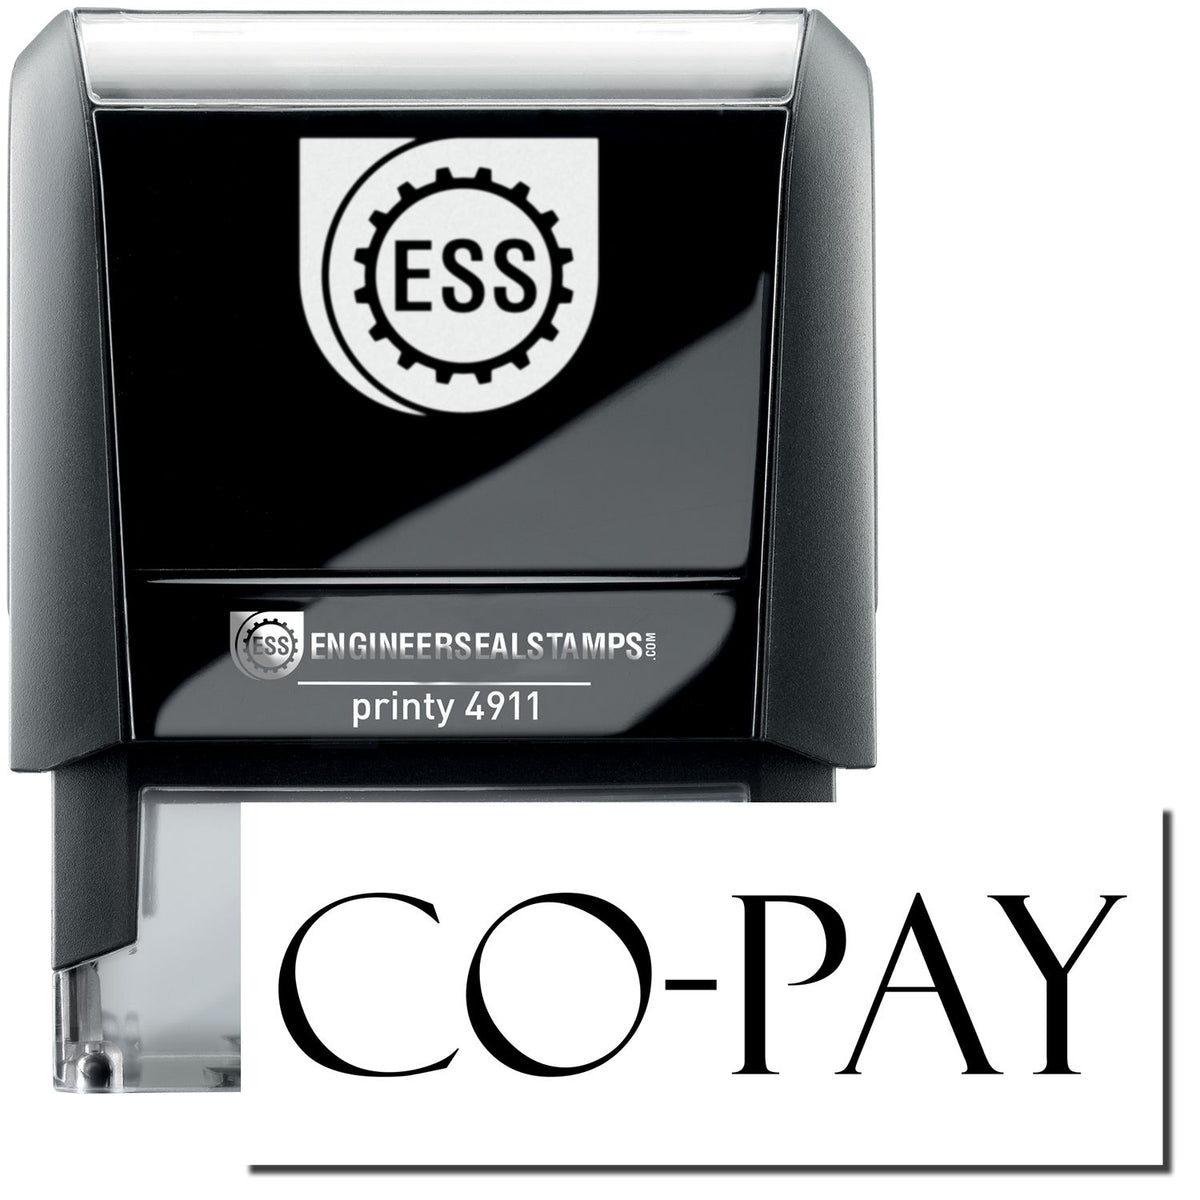 A self-inking stamp with a stamped image showing how the text &quot;CO-PAY&quot; is displayed after stamping.